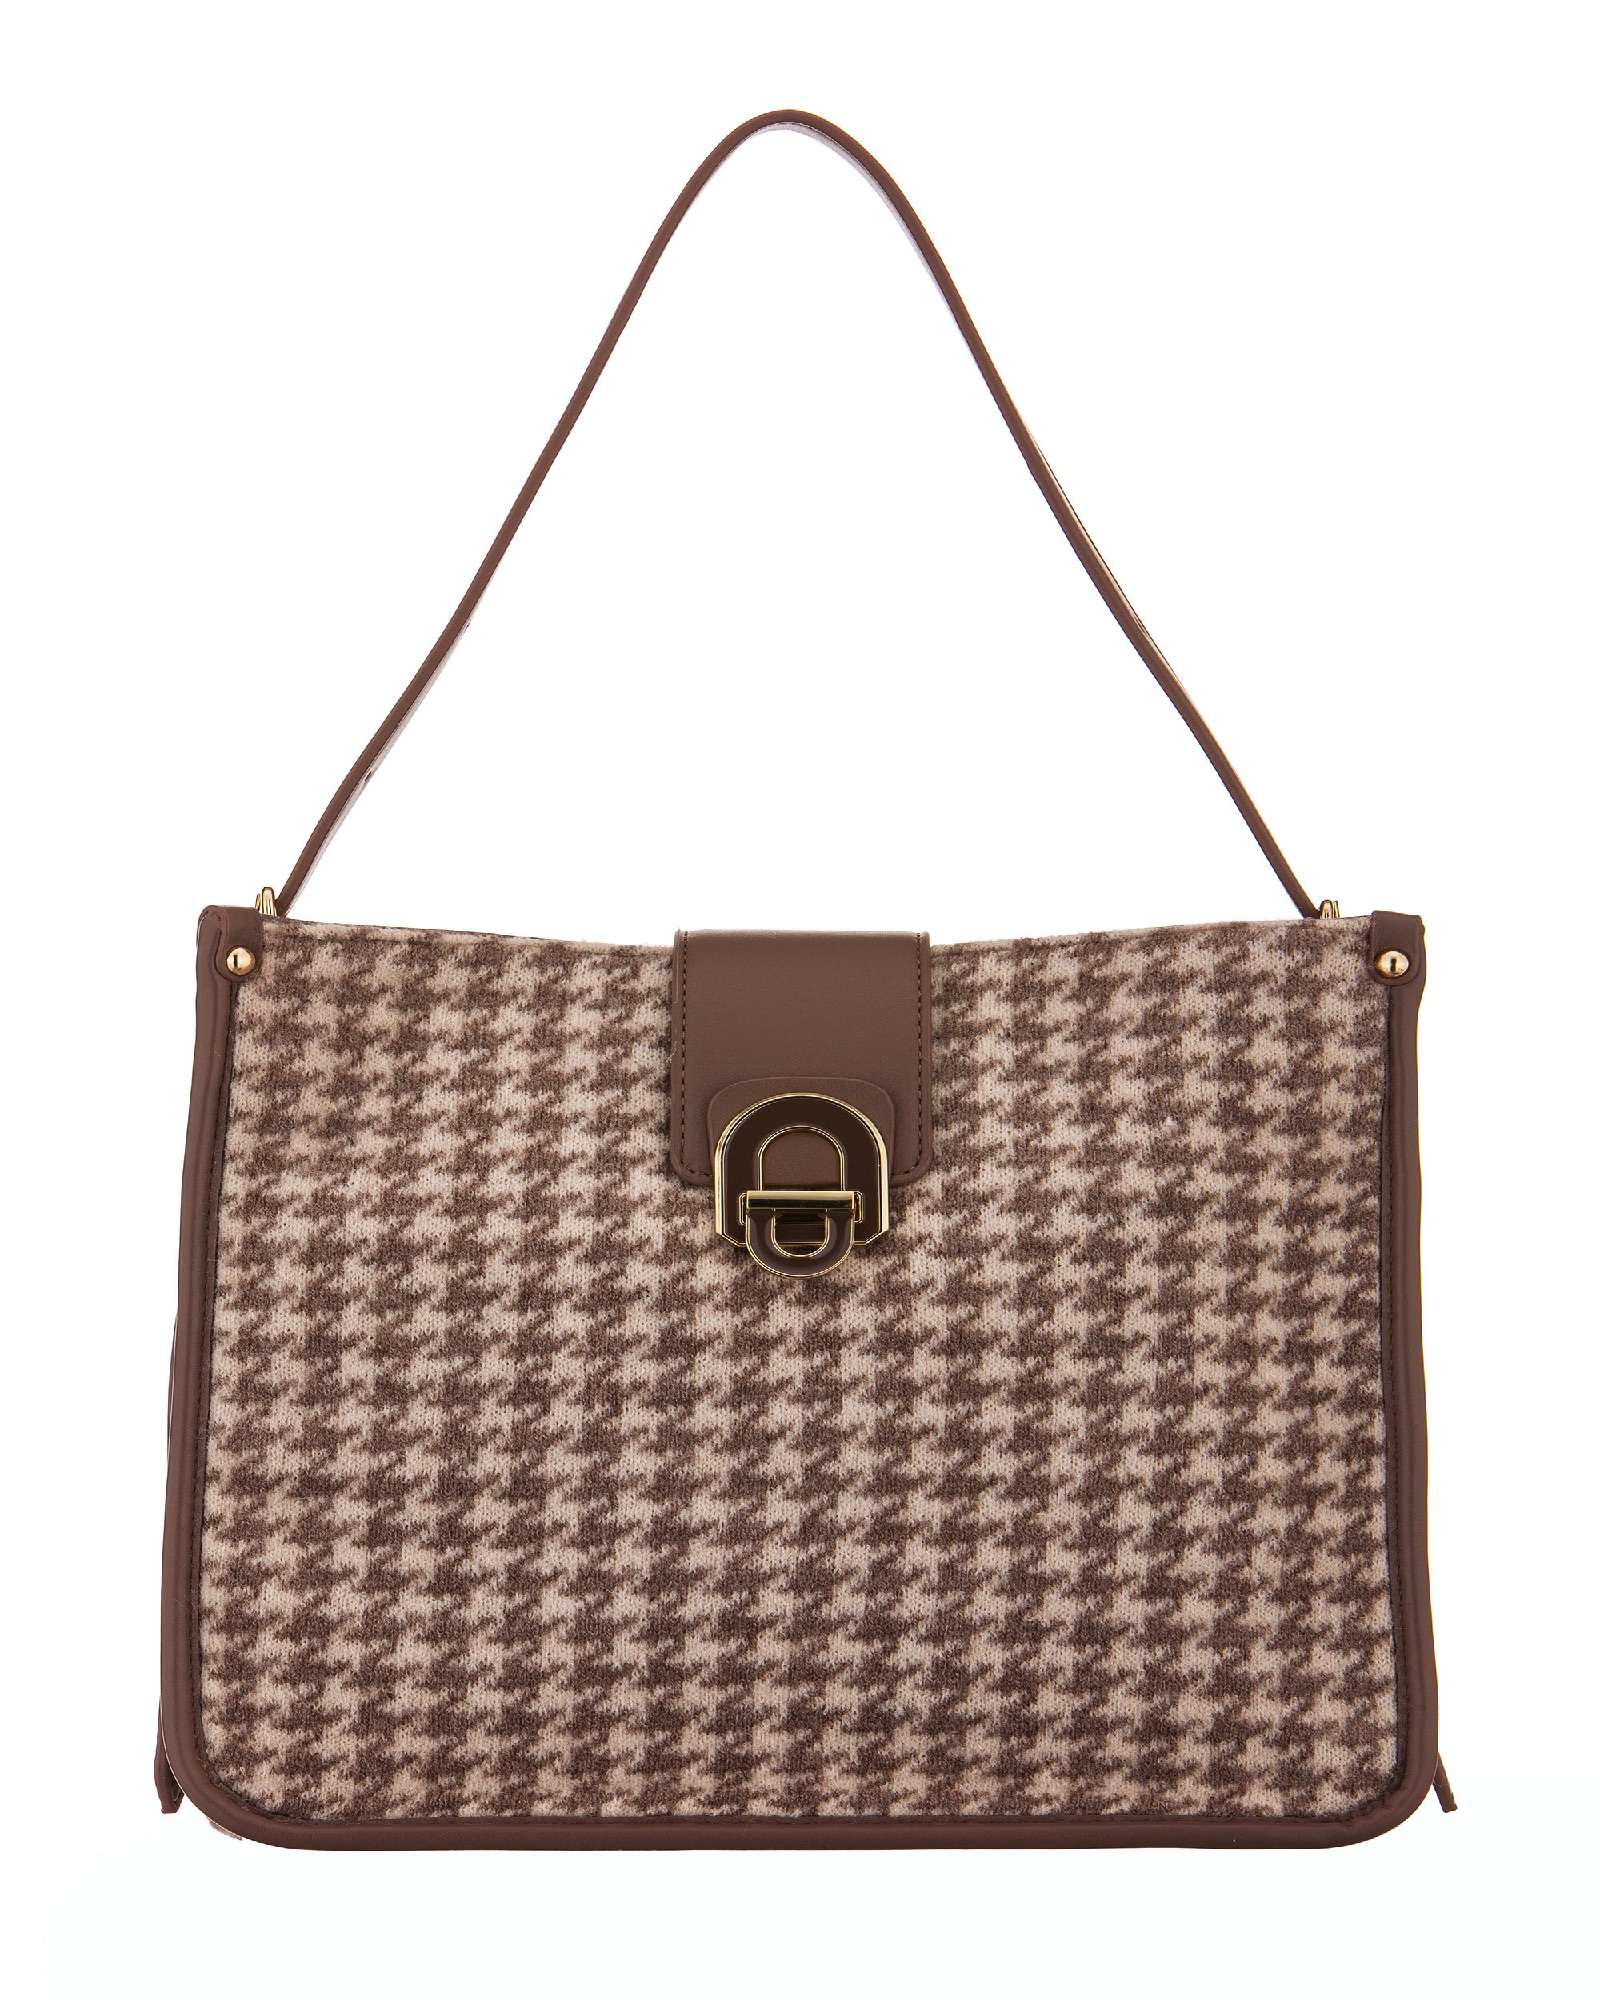 HAND BAG TAUPE - STYLE9073